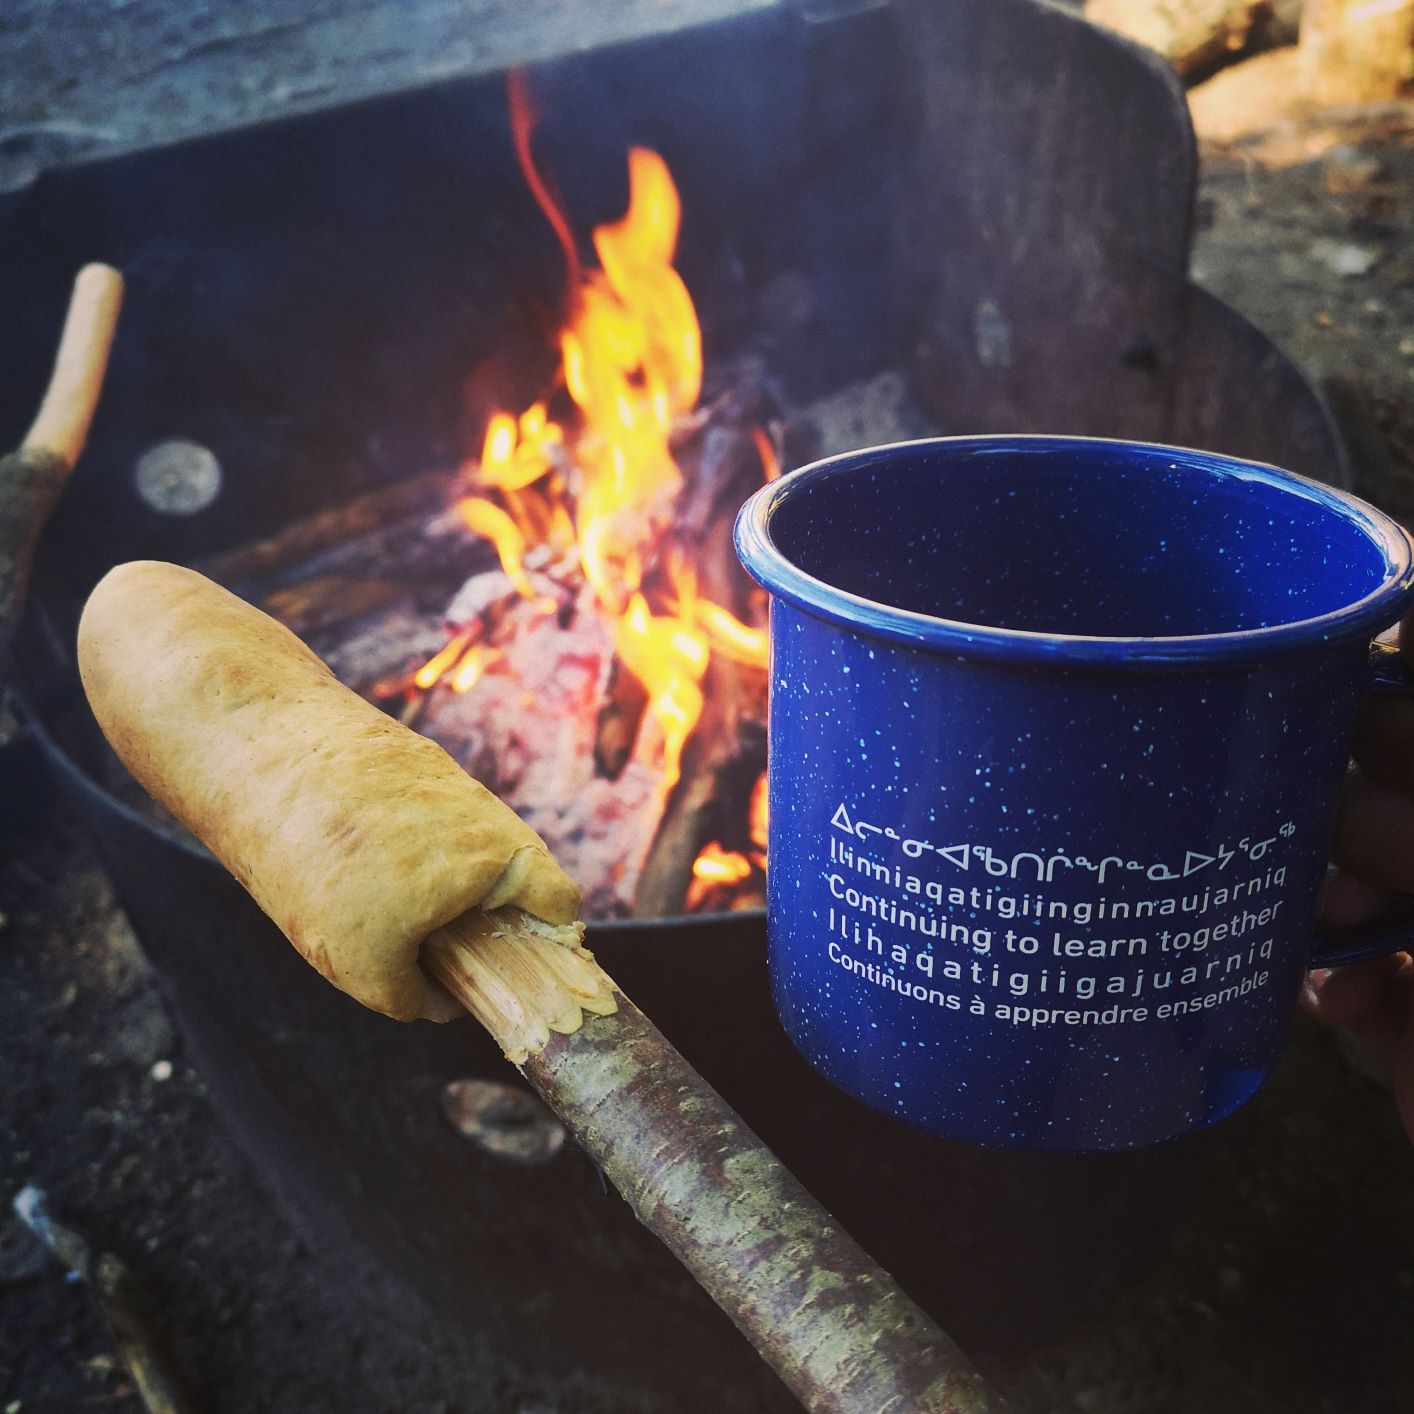 Bannock on a stick is shown beside a campfire and a blue mug that says continuing to learn together in several Indigenous languages